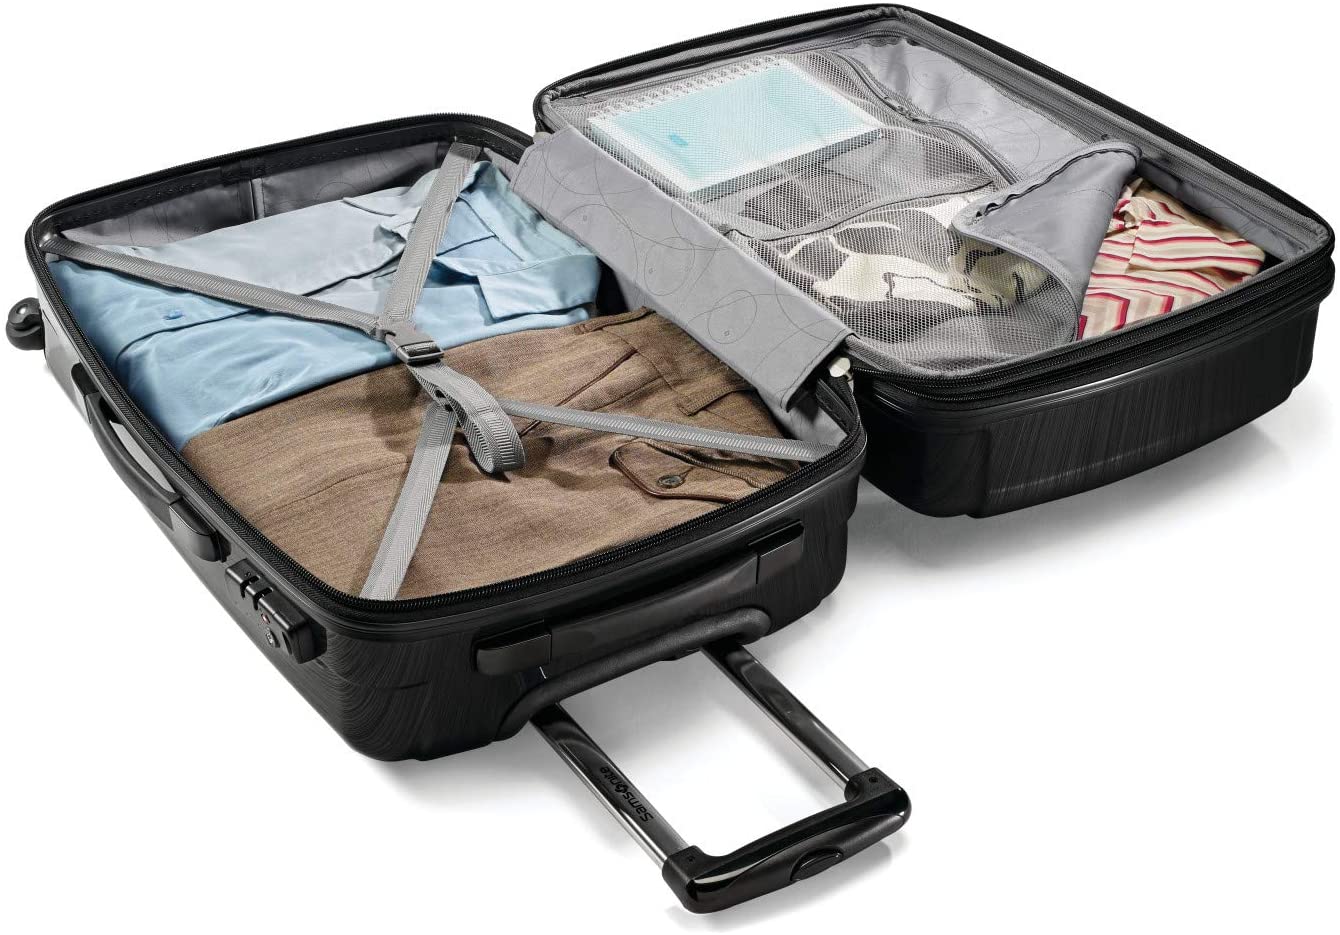 Cruise gear for Prime Day - Open Samsonite hardside luggage revealing folded shirts and pants